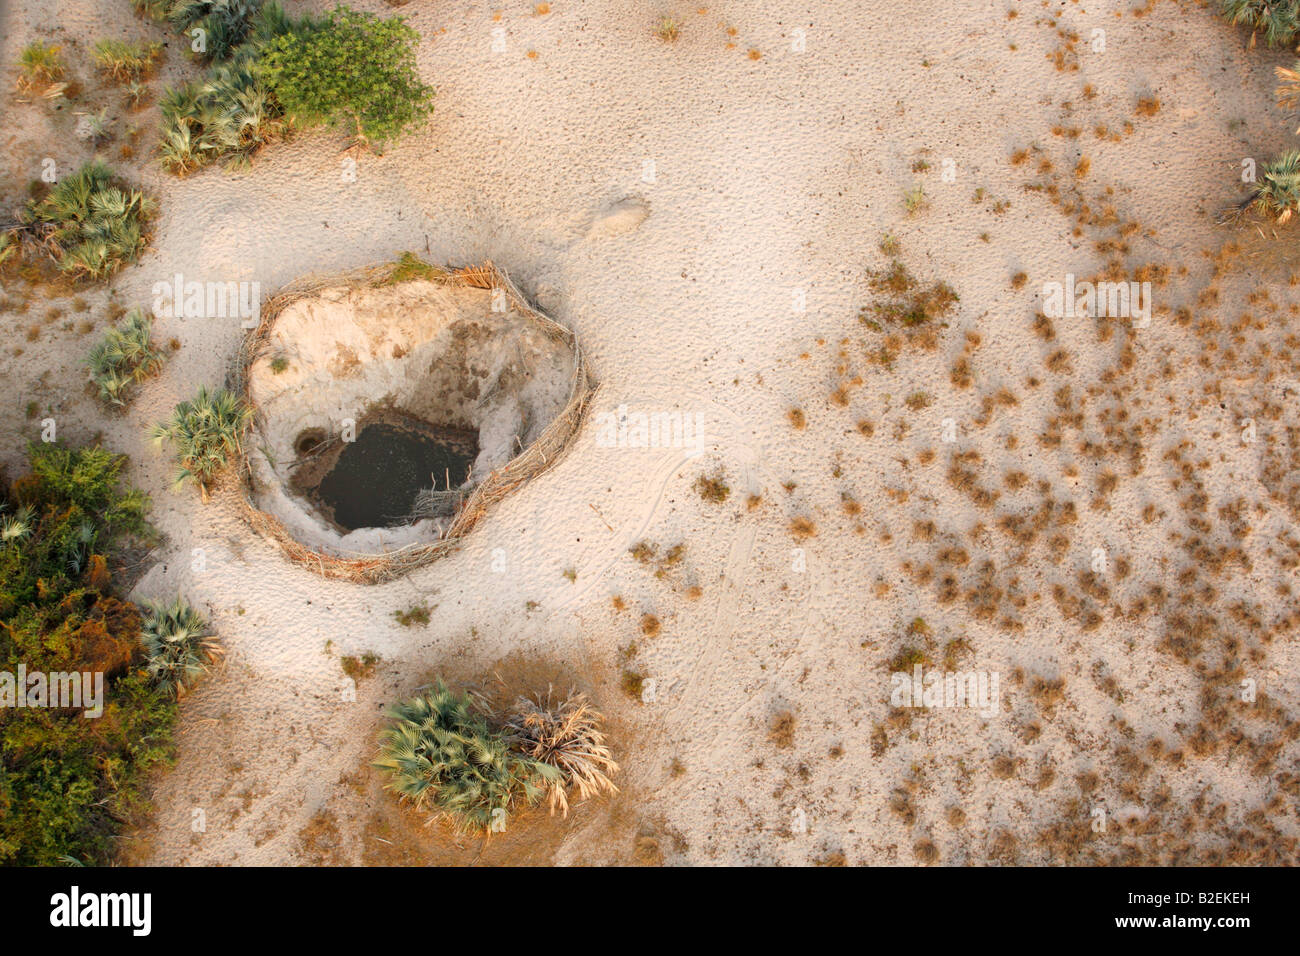 Aerial view of an artesian well dug in the ground by herdsmen in the Banhine National Park. The well is protected by a fence. Stock Photo